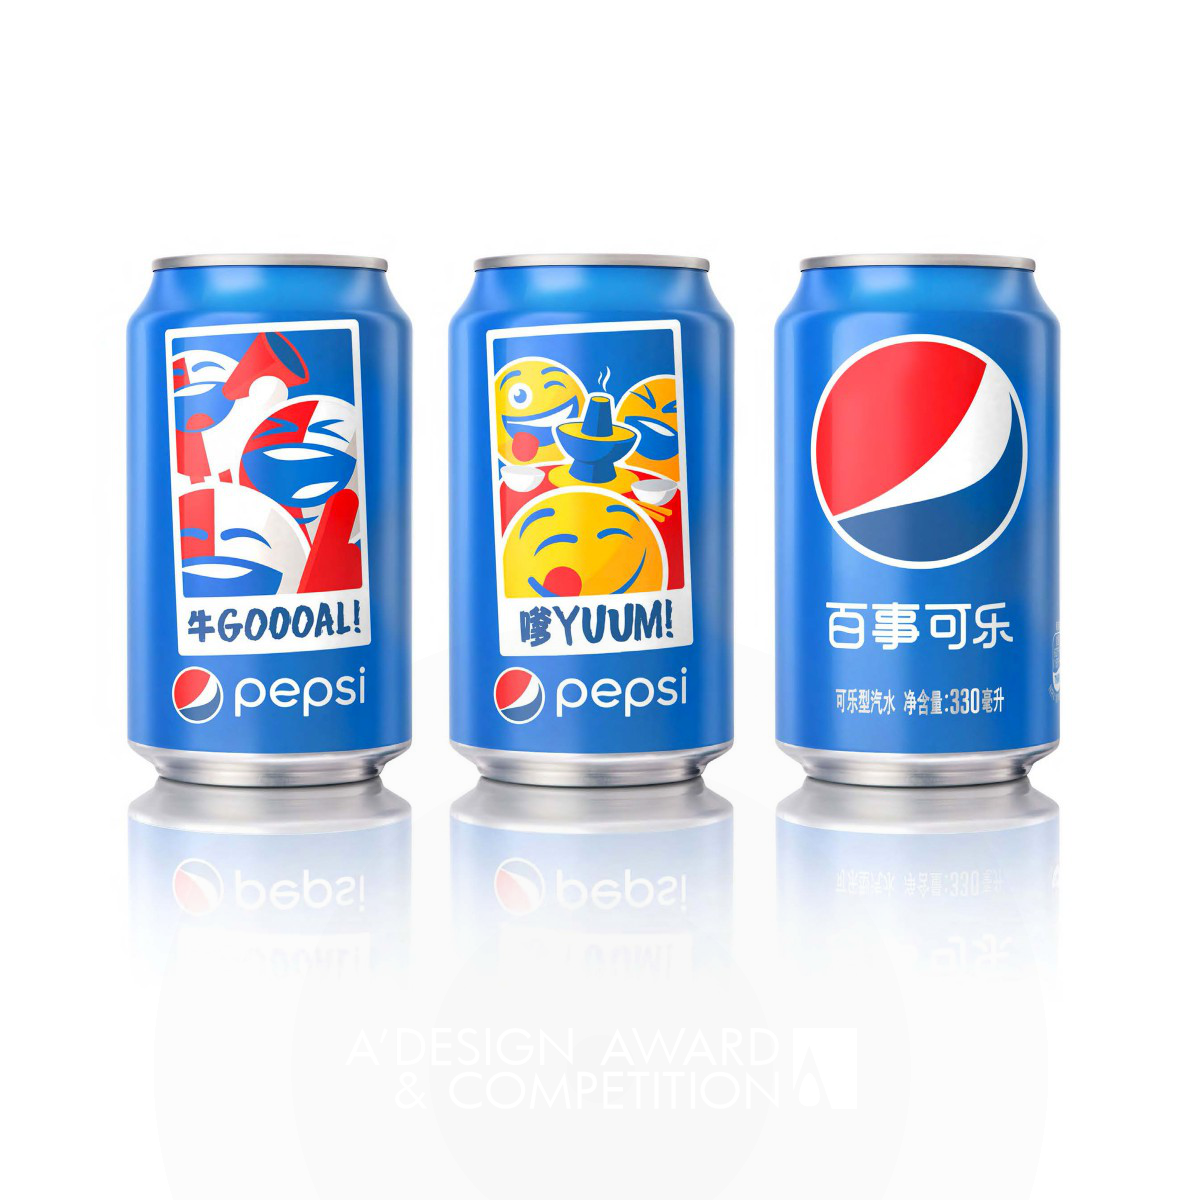 Pepsi Moments CHINA Augmented Reality Ltd Ed Cans Campaign by PepsiCo Design & Innovation